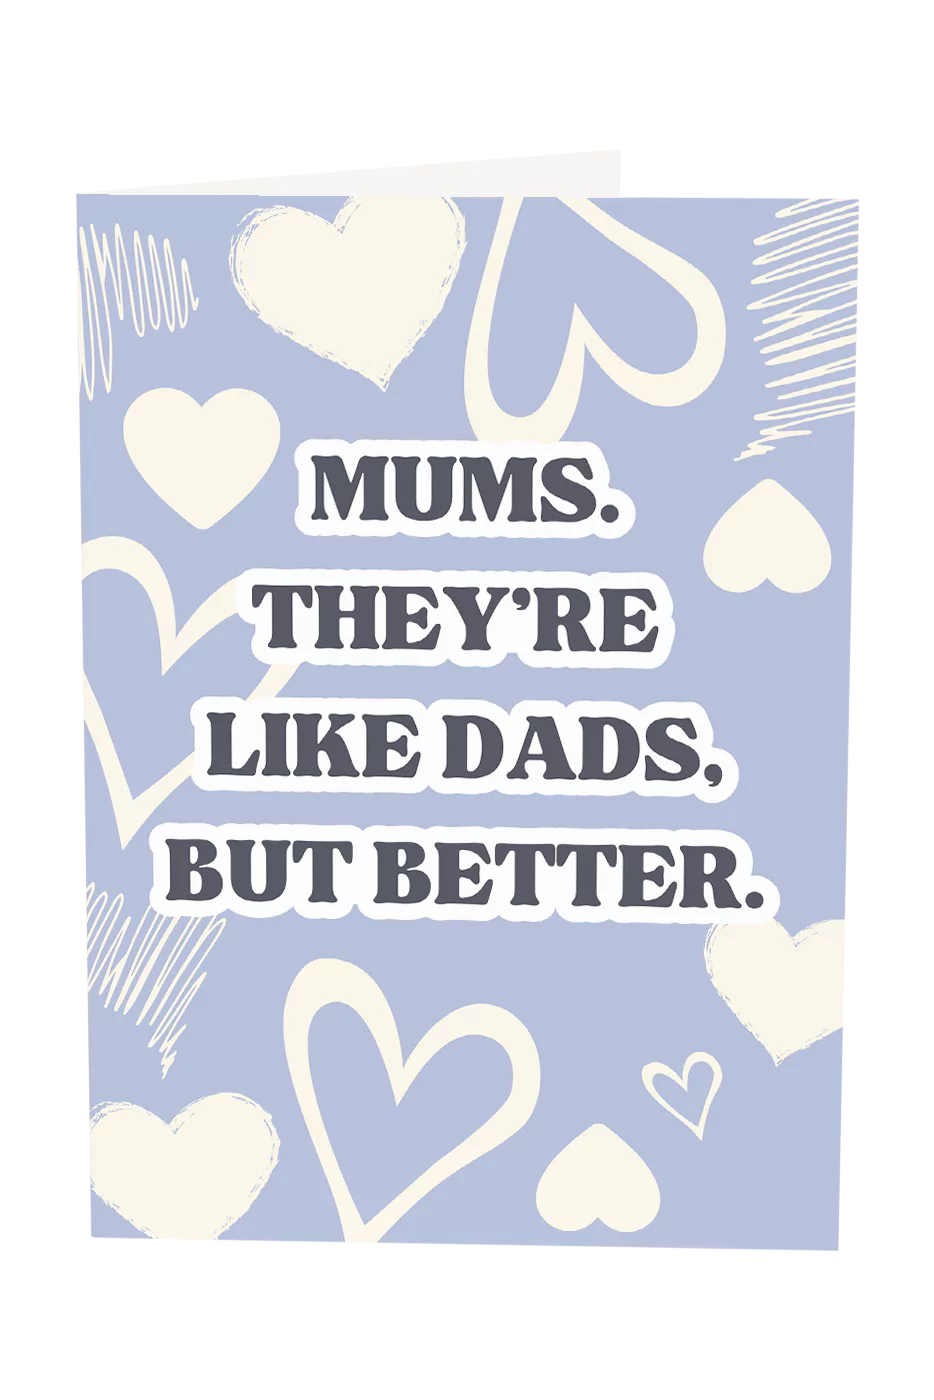 Mums Are Like Dads, But Better